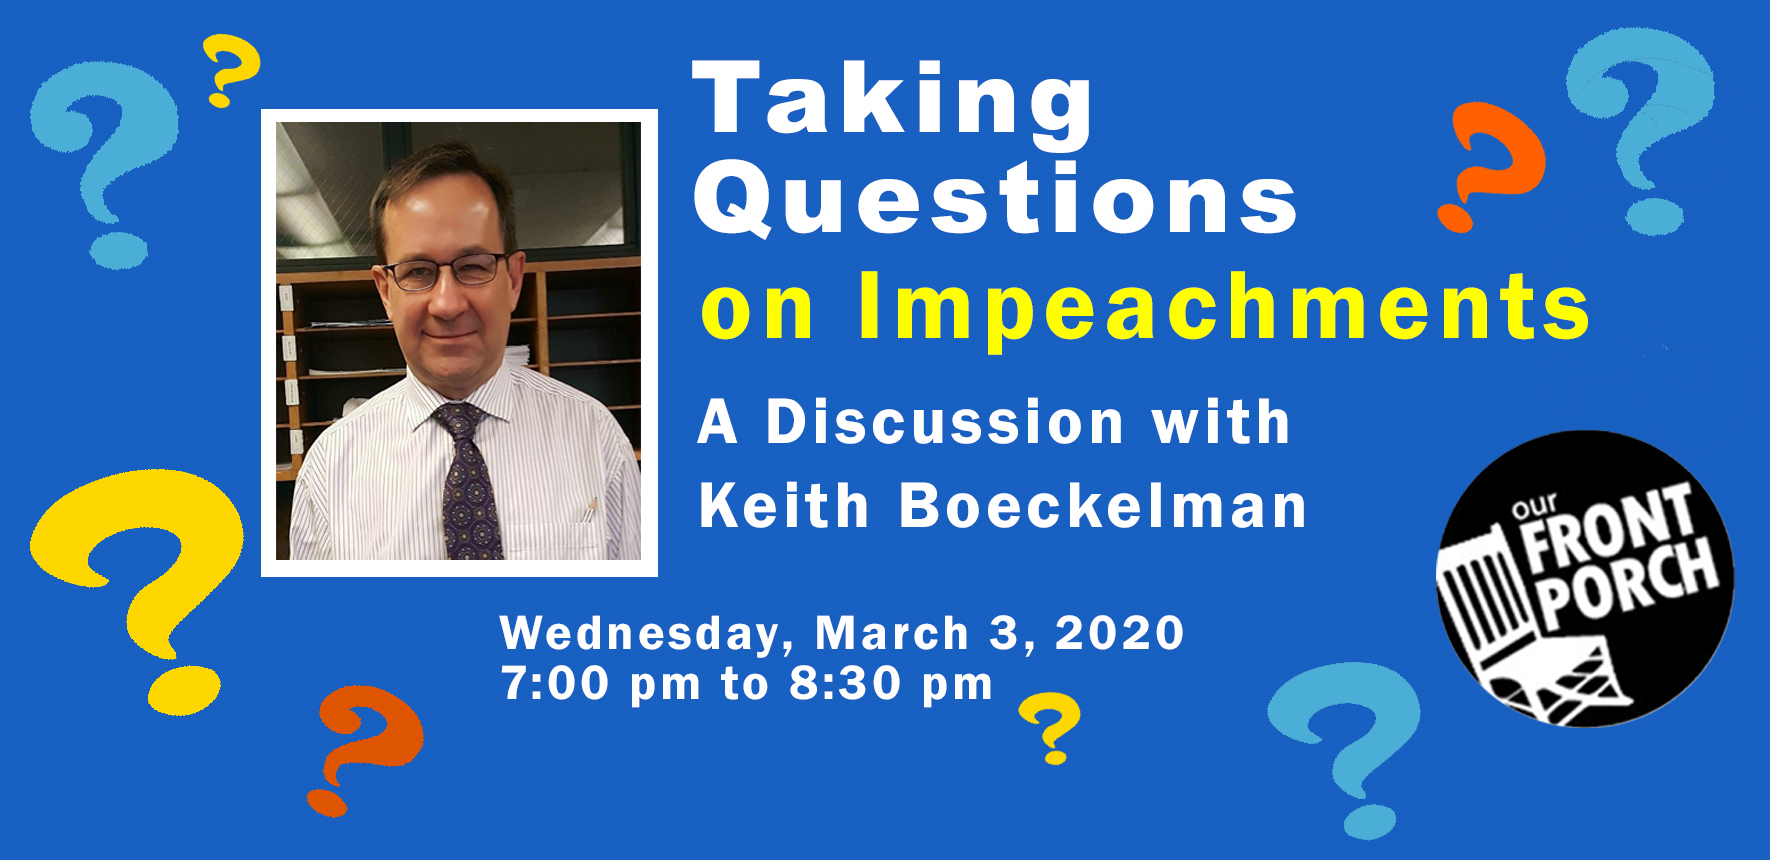 Taking Questions with Keith Boeckelman